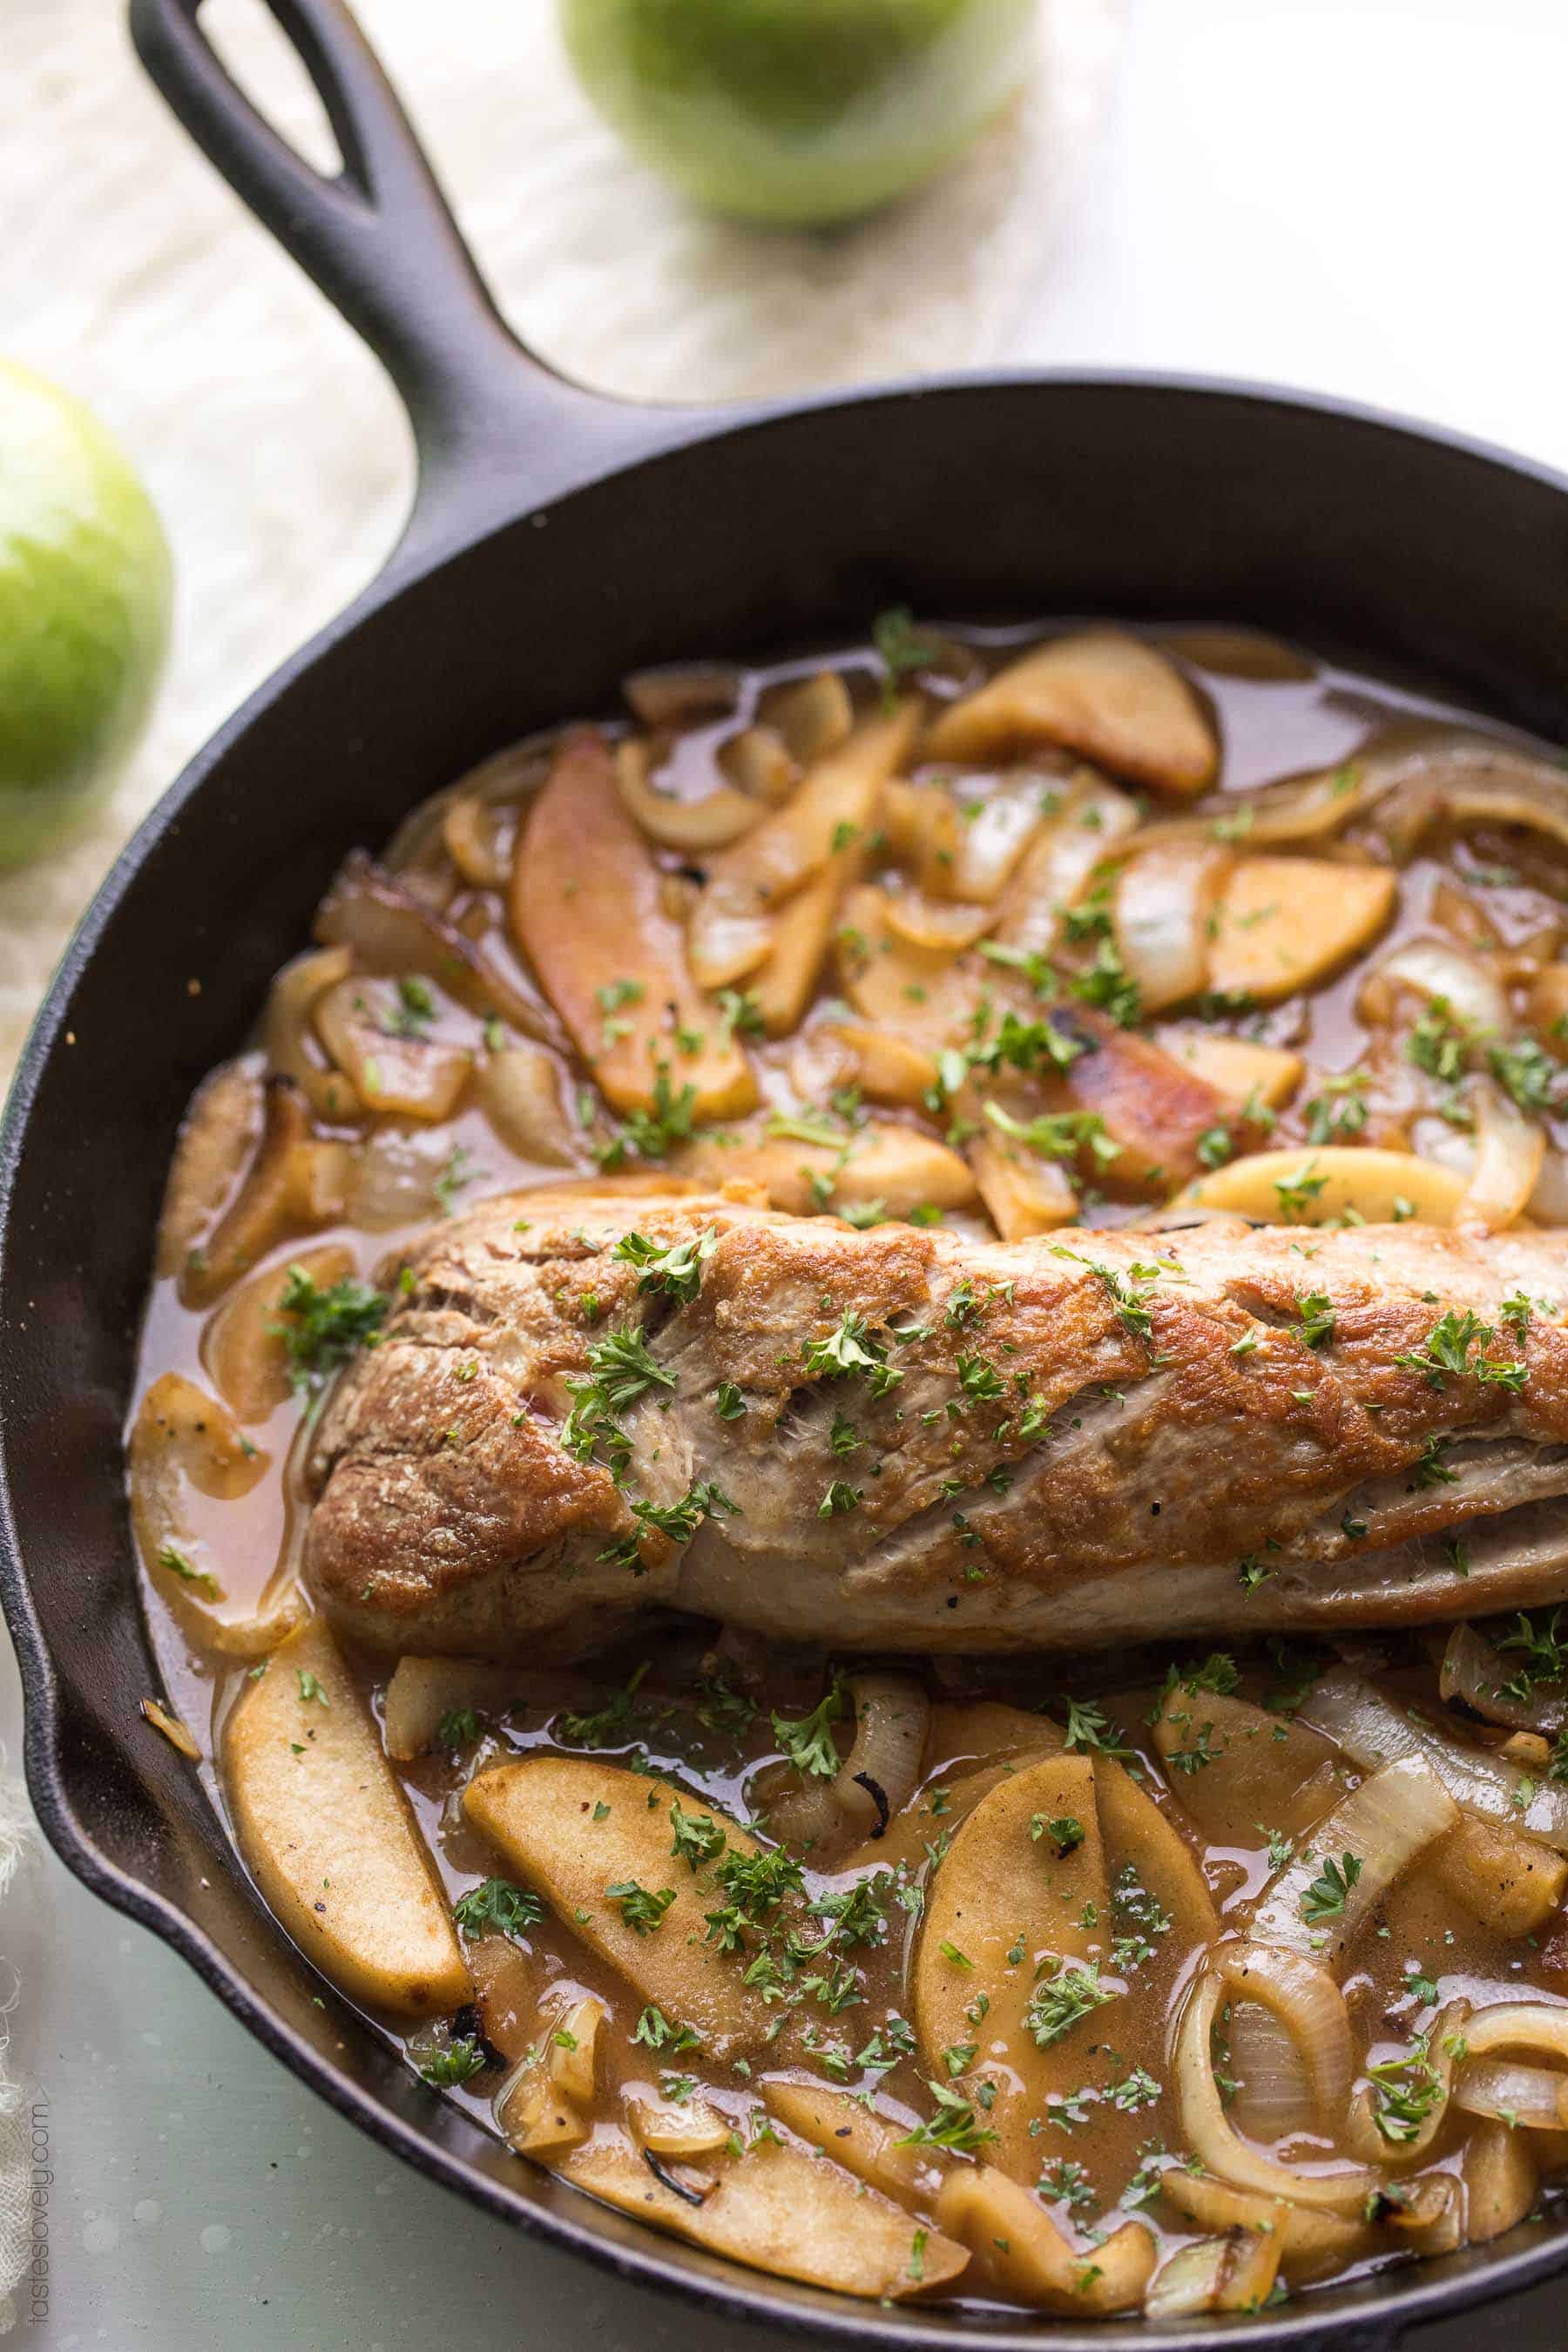 Paleo and Whole30 Apple & Onion Braised Pork Tenderloin - a flavorful and juicy dinner recipe that is dairy free, gluten free, sugar free